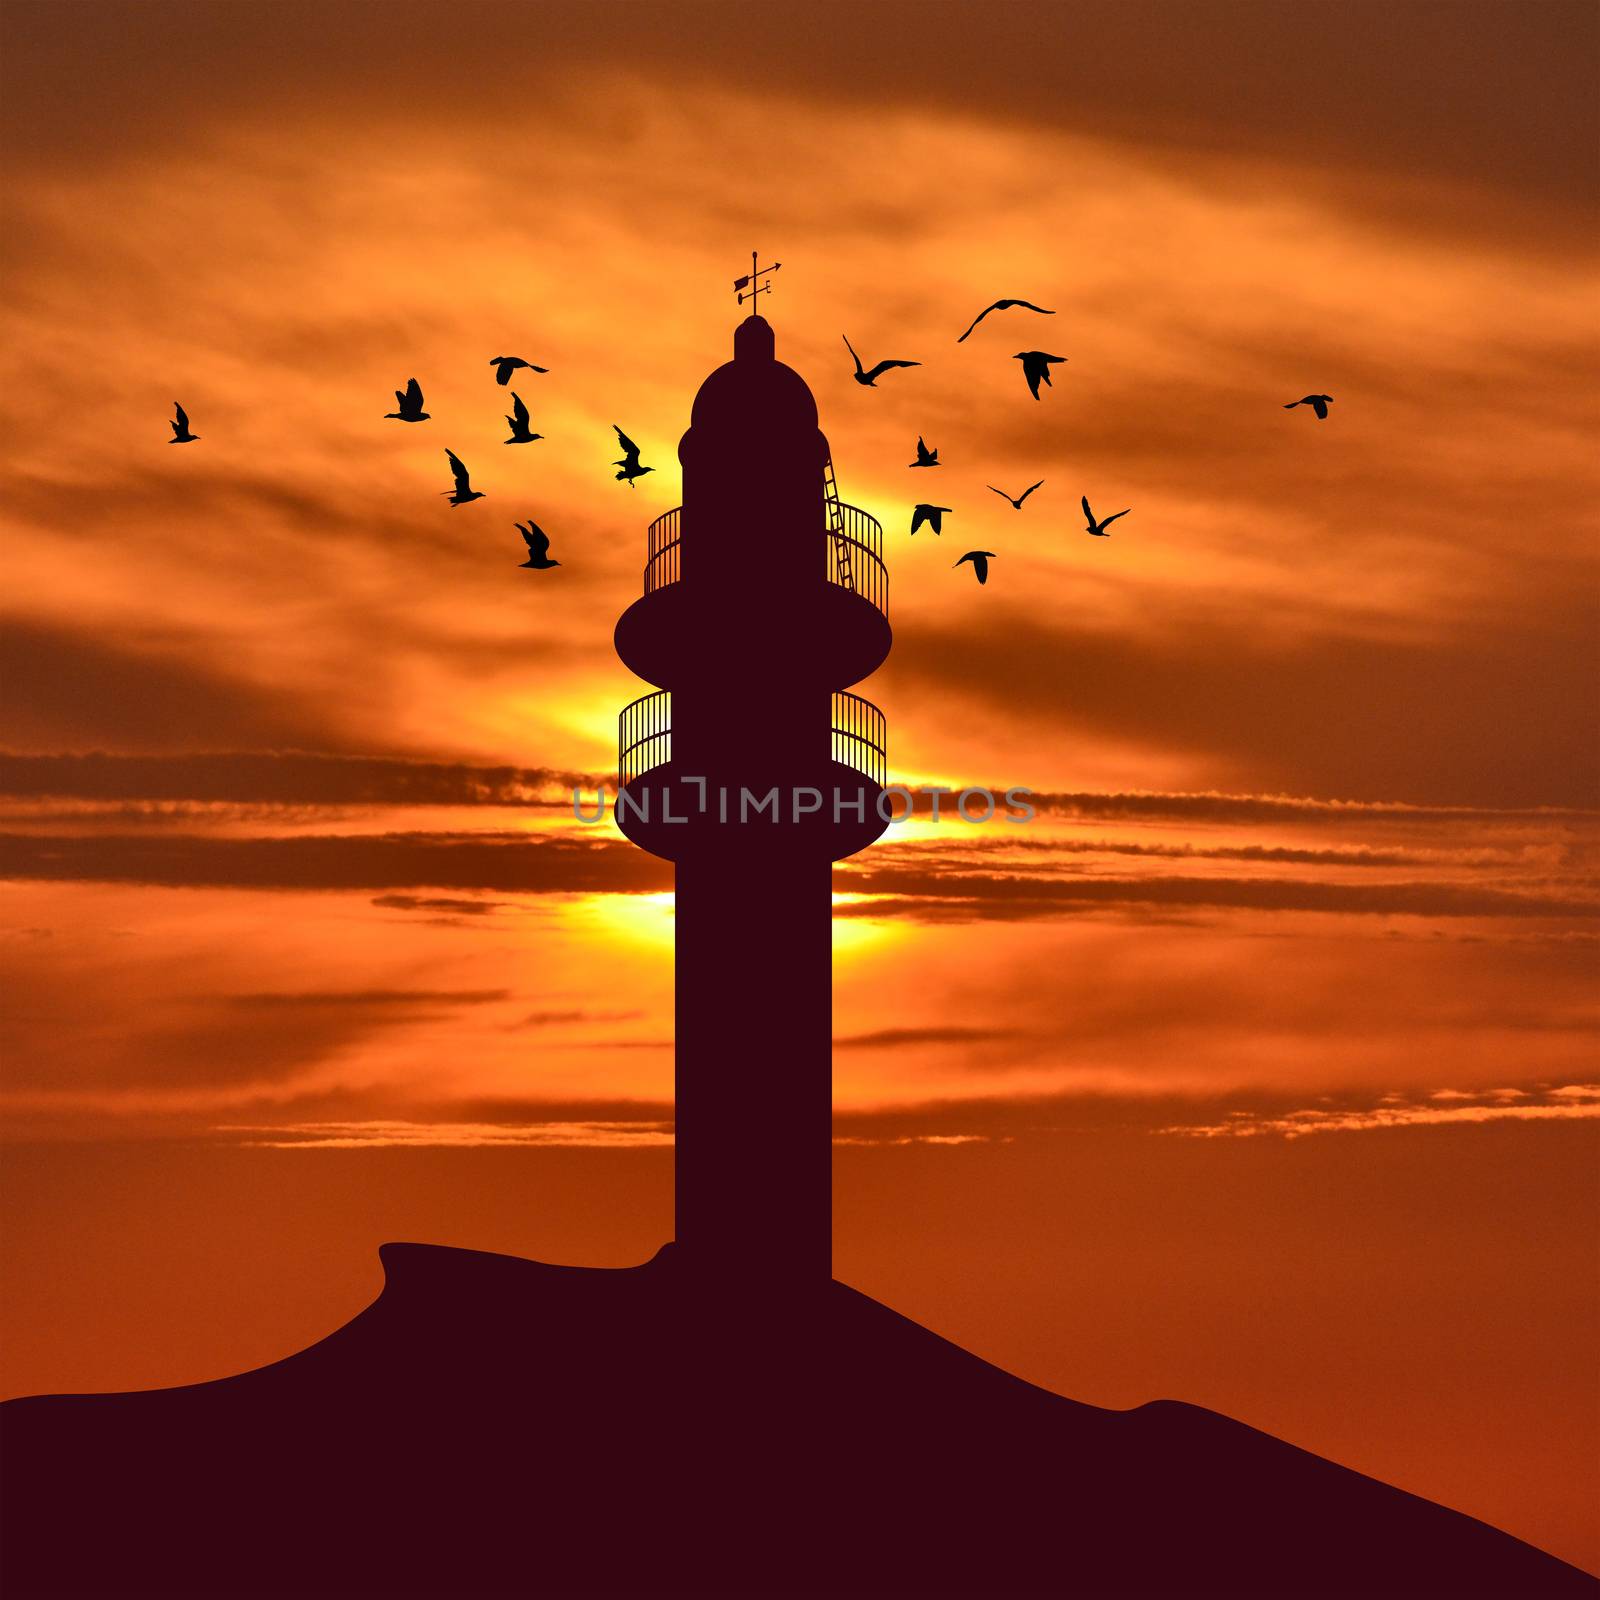 Lighthouse silhouette and birds flying around it by hibrida13